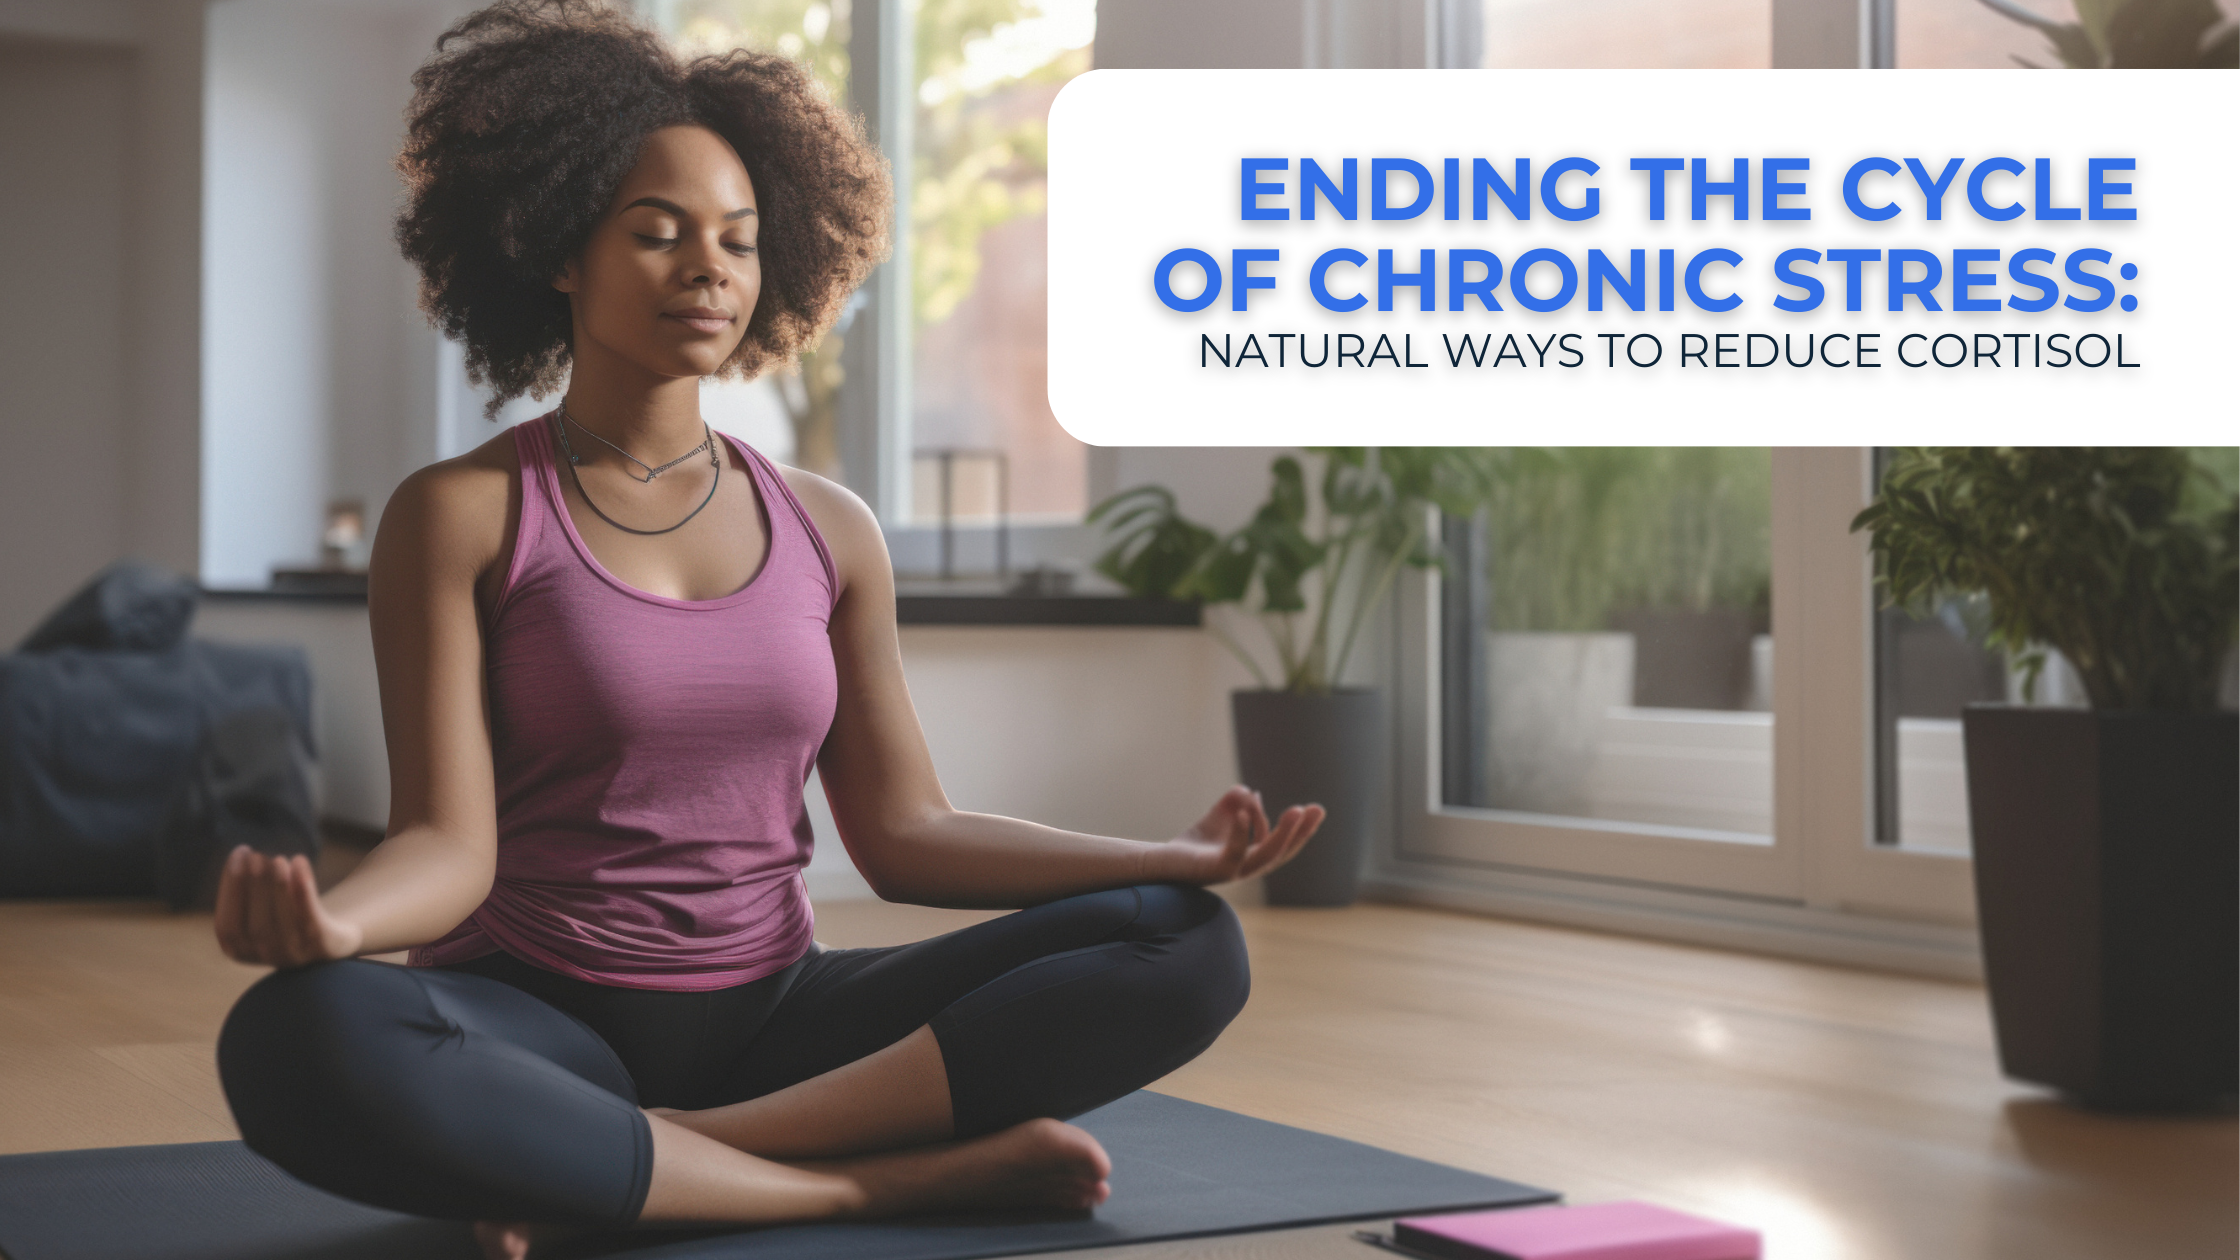 Ending the Cycle of Chronic Stress: Natural Ways to Reduce Cortisol